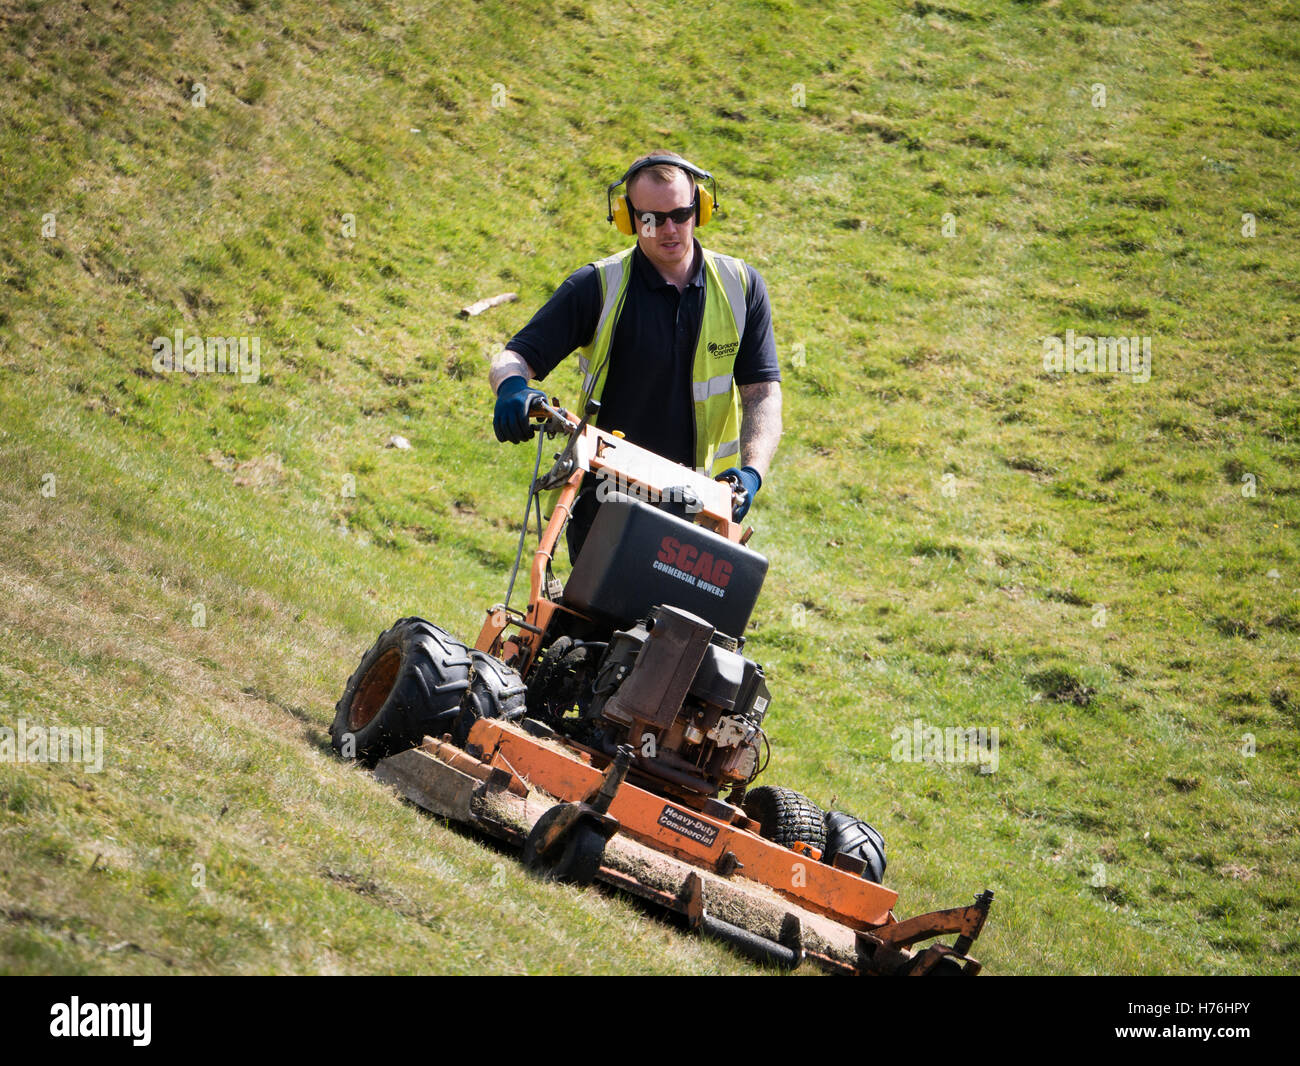 How to safely mow steep slopes